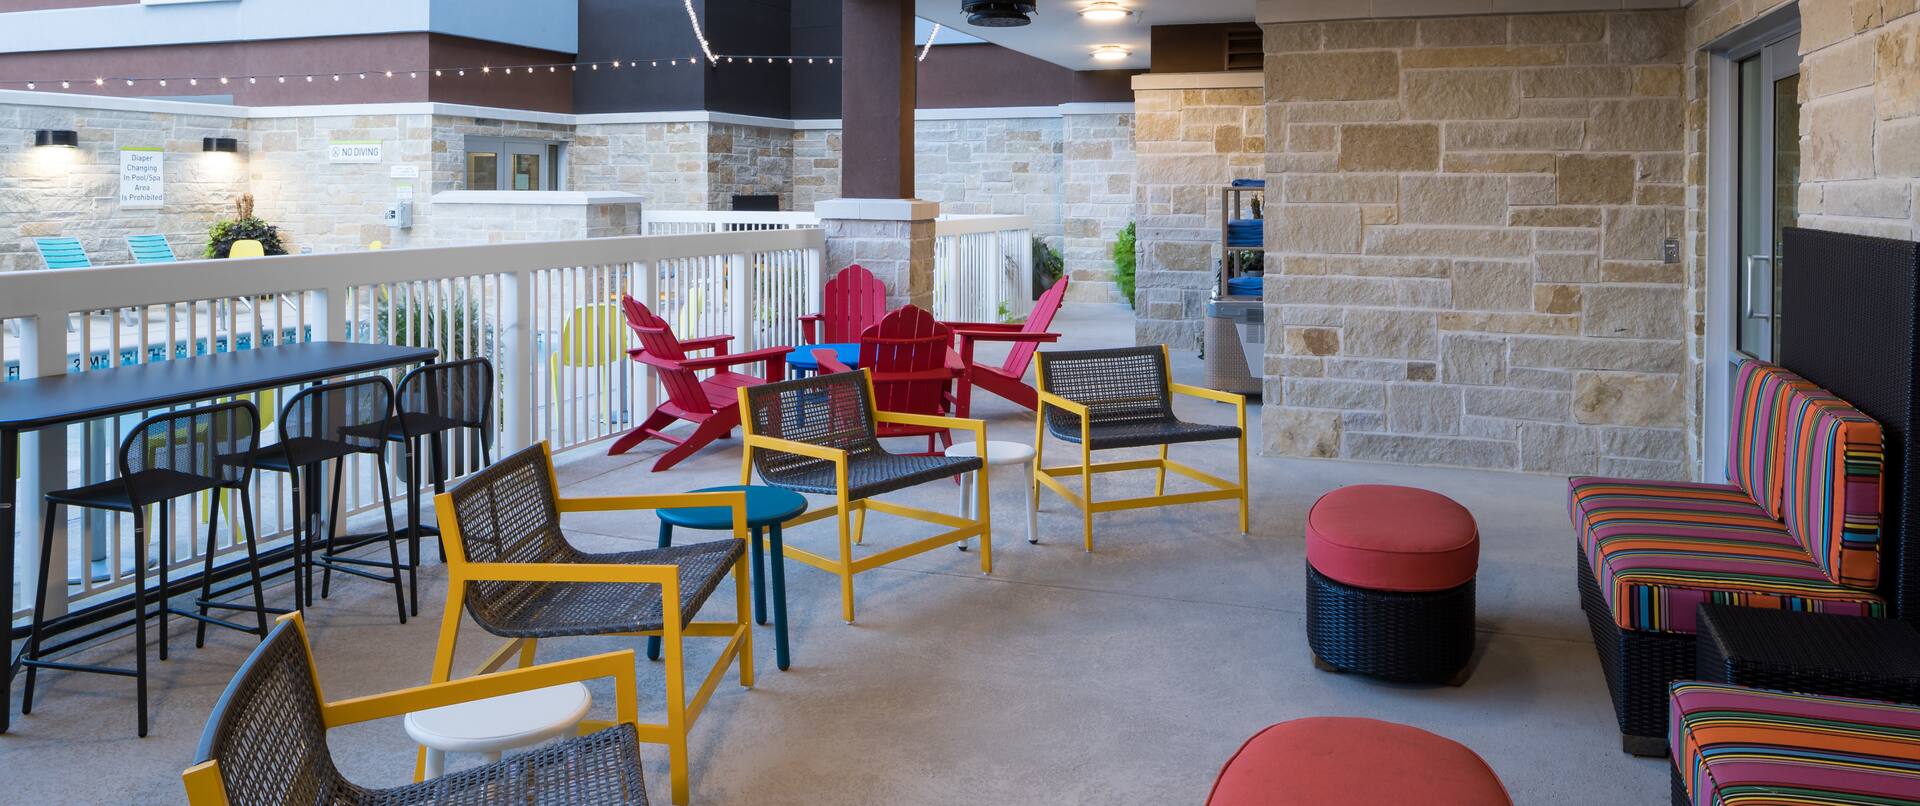 Outdoor seating area with tables and chairs